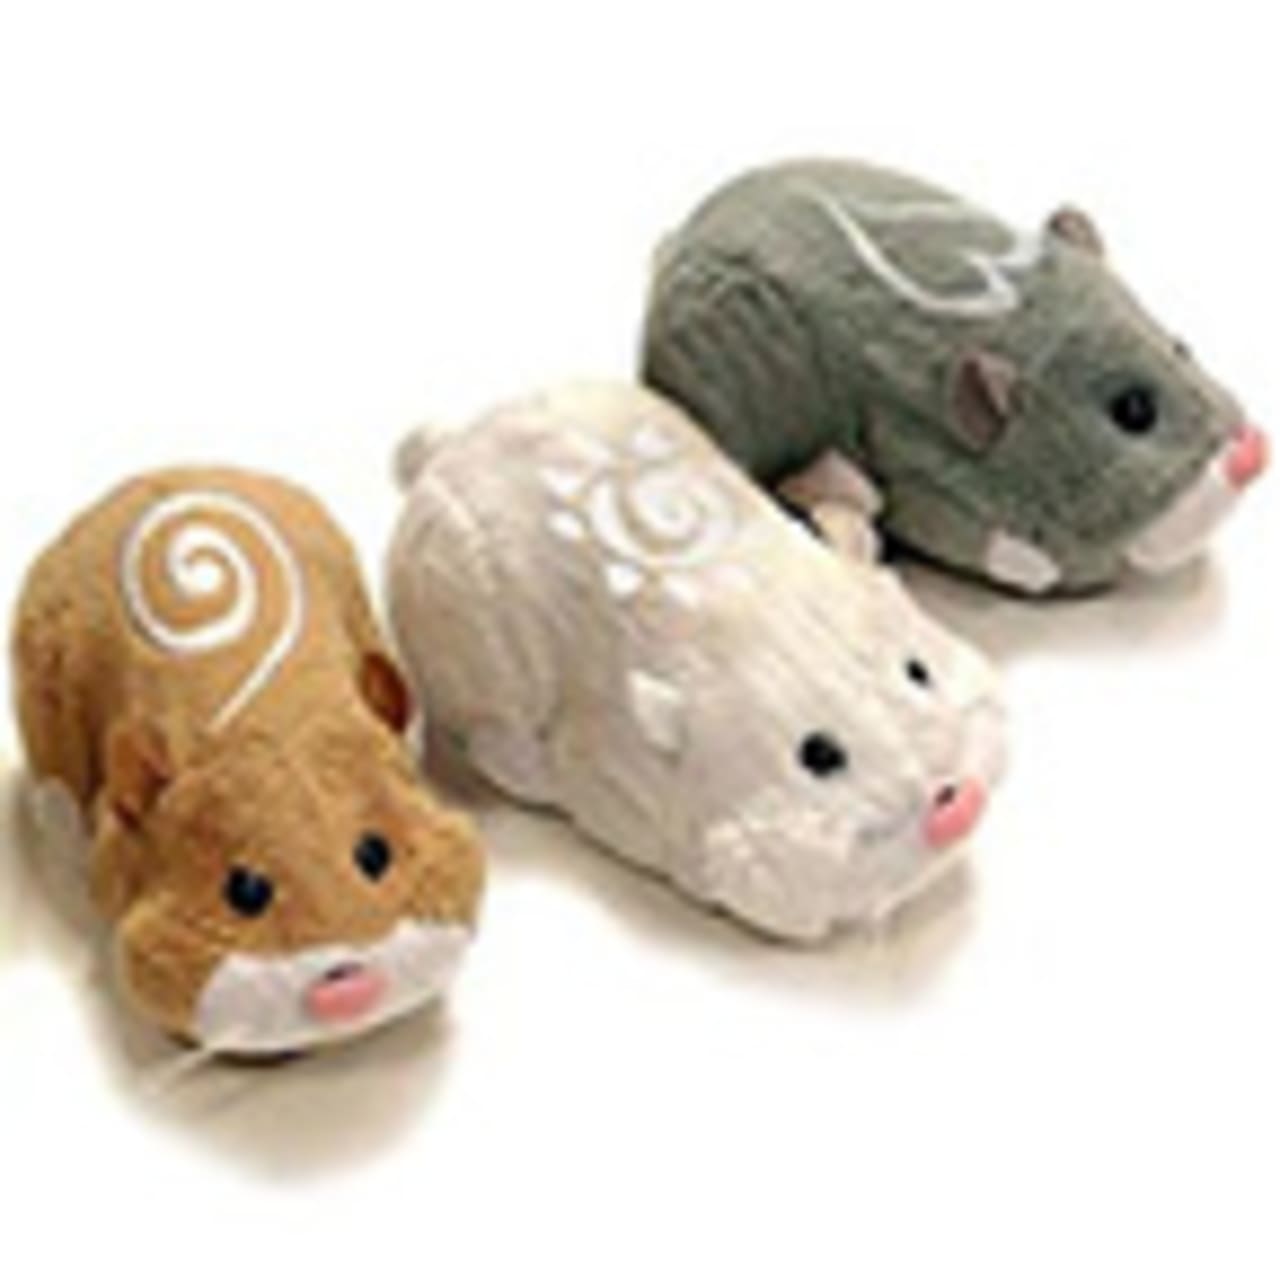 guinea pig toy for kids